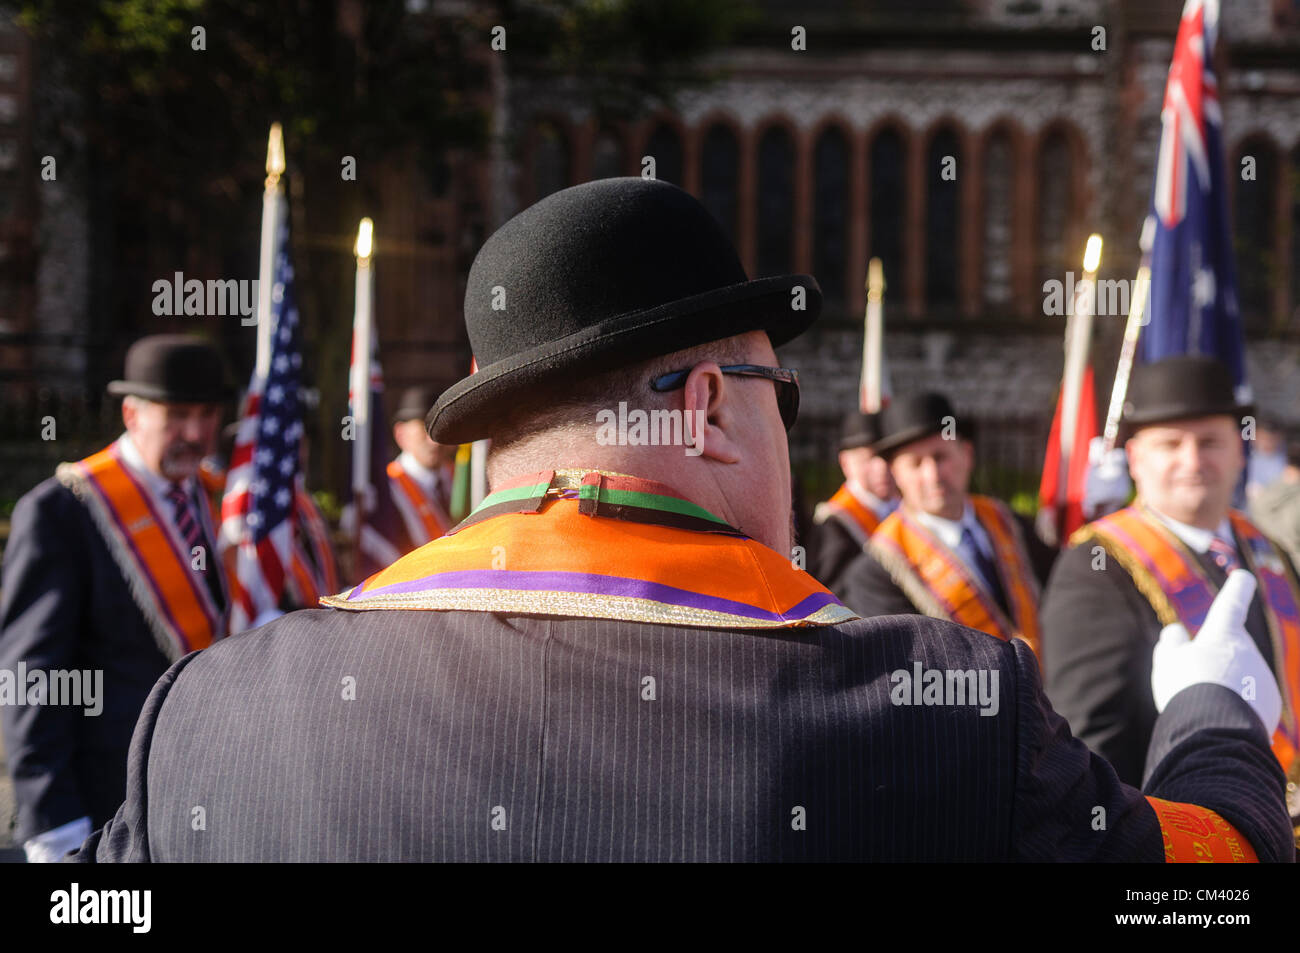 Orange Order official gives directions to fellow Orangemen during a briefing at the start of a parade Stock Photo